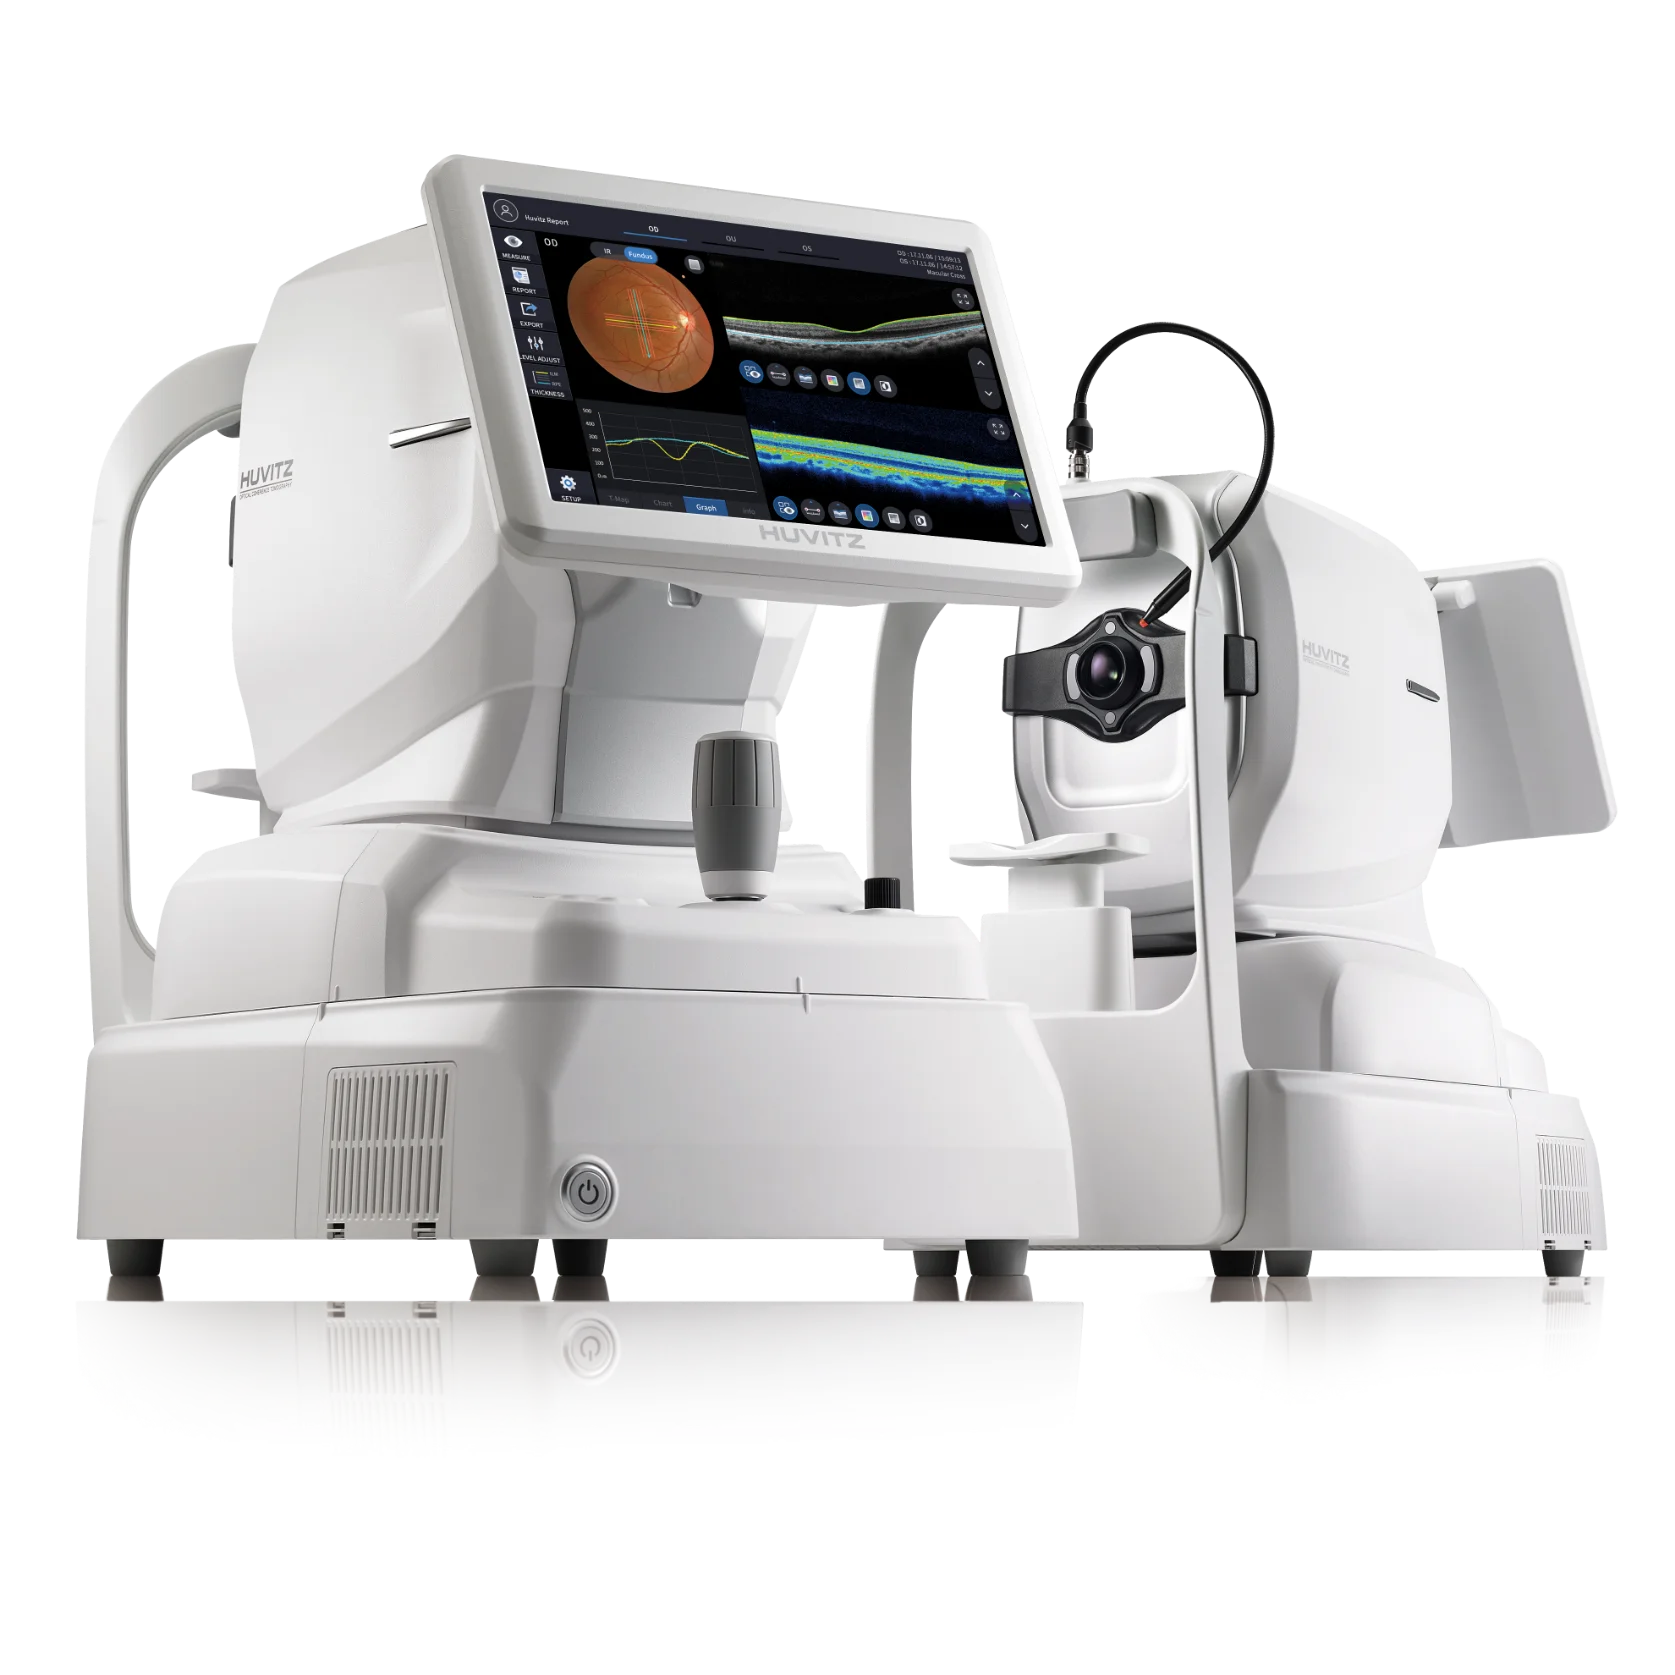 Huvitz HOCT 1 with fundus imaging - optical equipment by Mainline